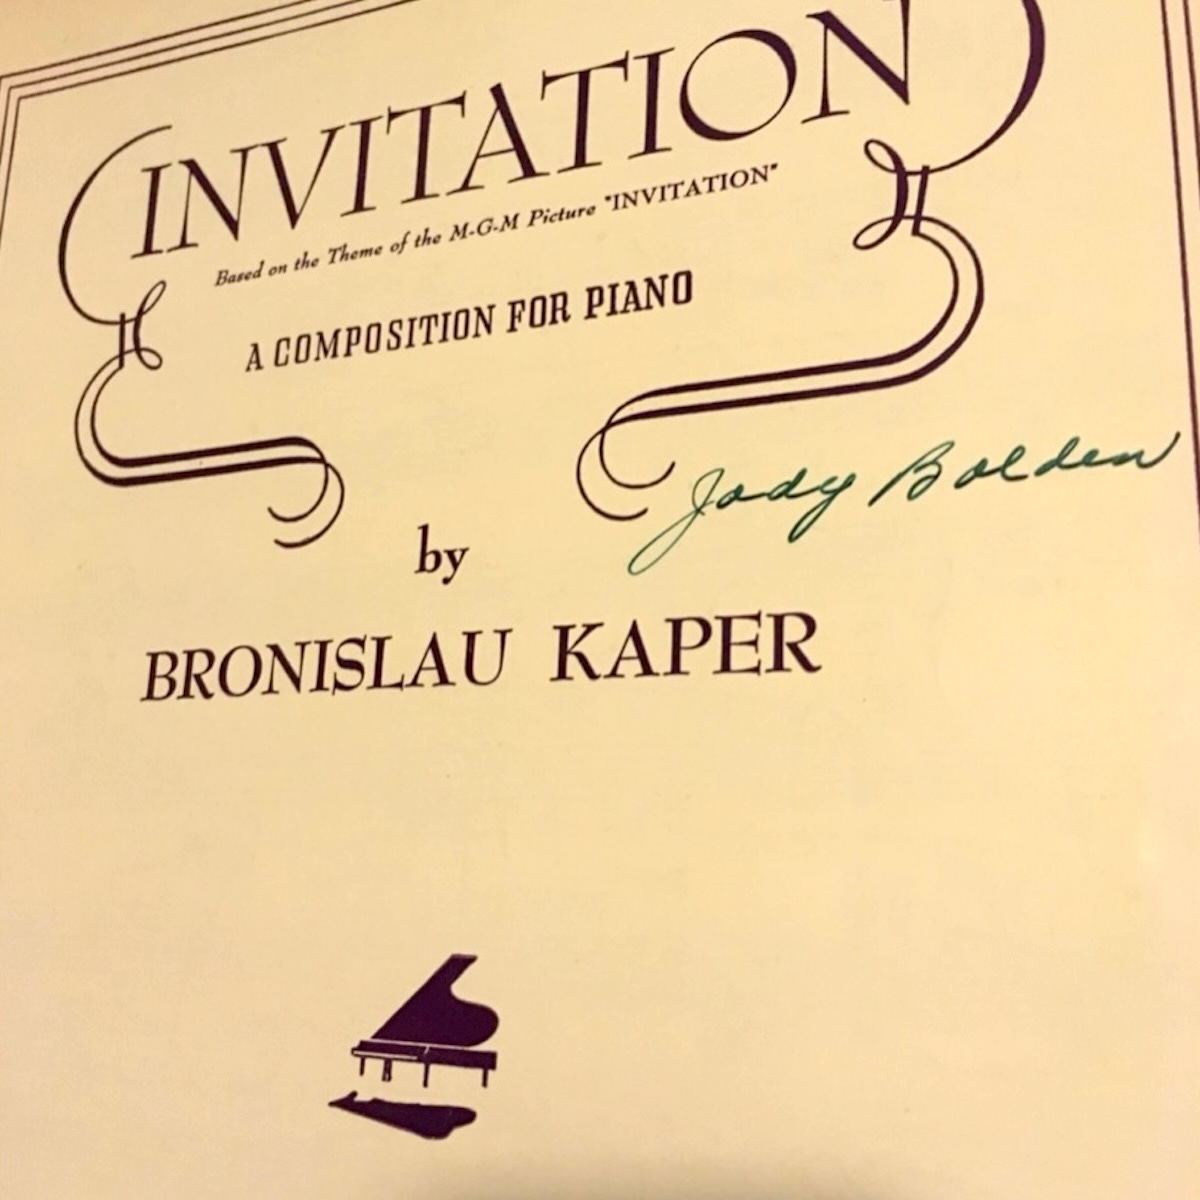 Sheet music cover has a lined border and ornate trim around the title with a small illustration of a piano floating off an invisible ground, all in dark purple print. It reads: INVITATION. Based on the Theme of the M-G-M Picture *INVITATION*. A COMPOSITION FOR PIANO by BRONISLAU KAPER. Jody Bolden’s signature is in green ink to the right side under the title.